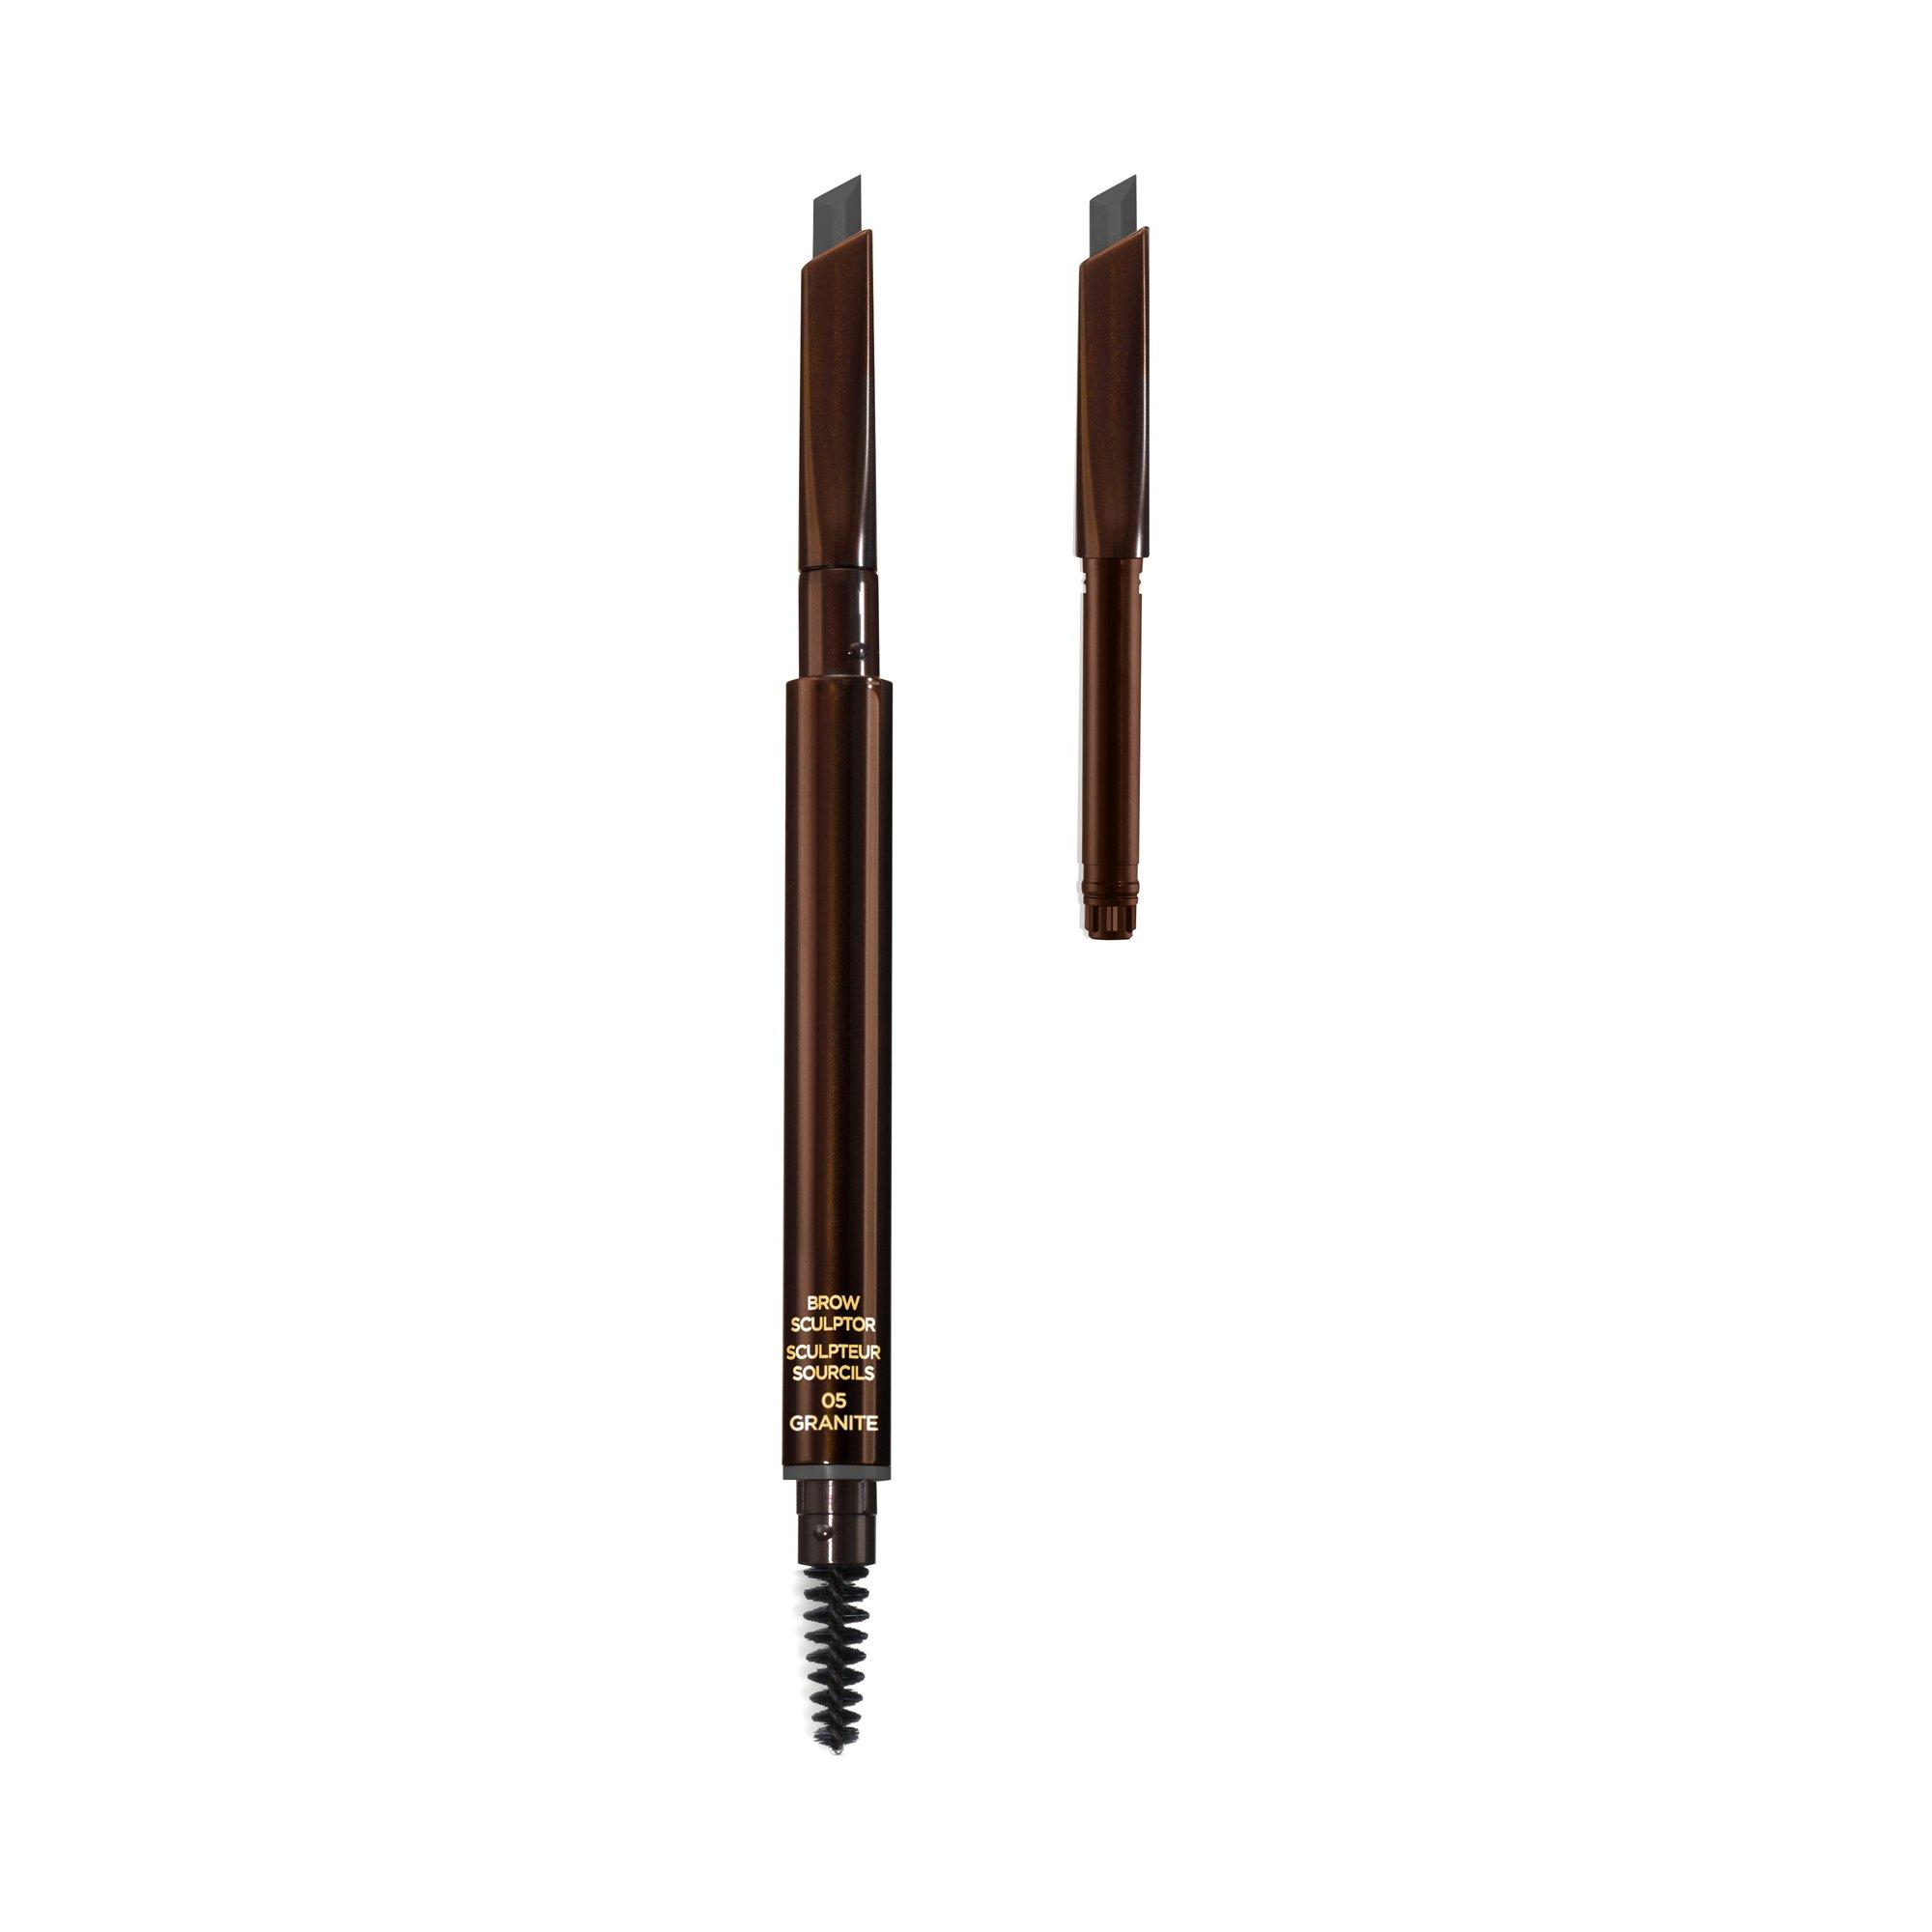 Image of TOM FORD Brow Sculptor - 0.1g